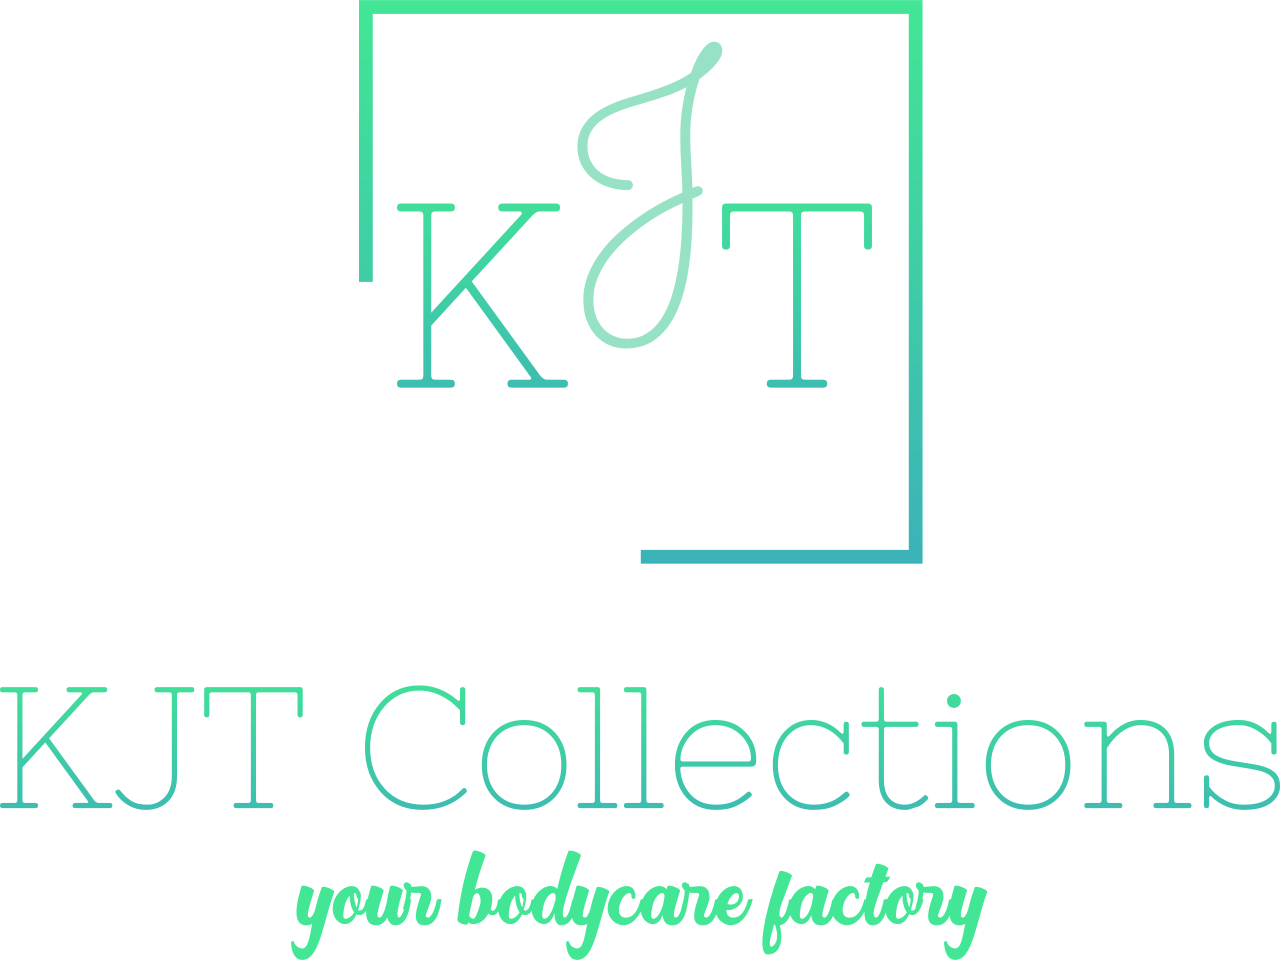 KJT Collections's logo